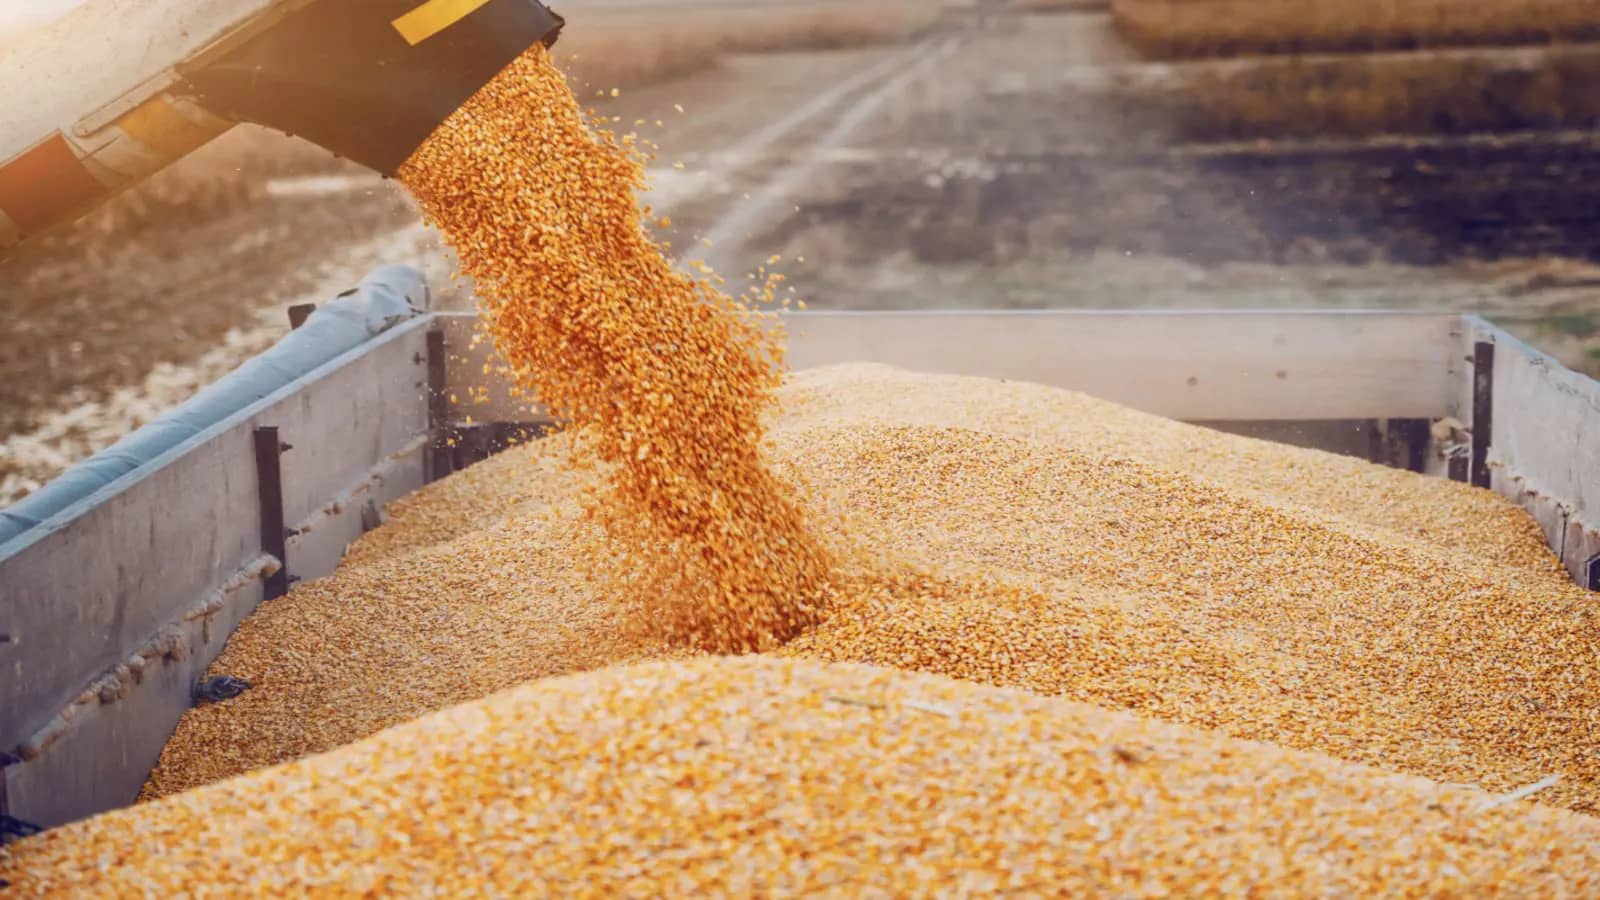 IGC optimistic of a bumper grain harvest despite poor growth conditions in some regions